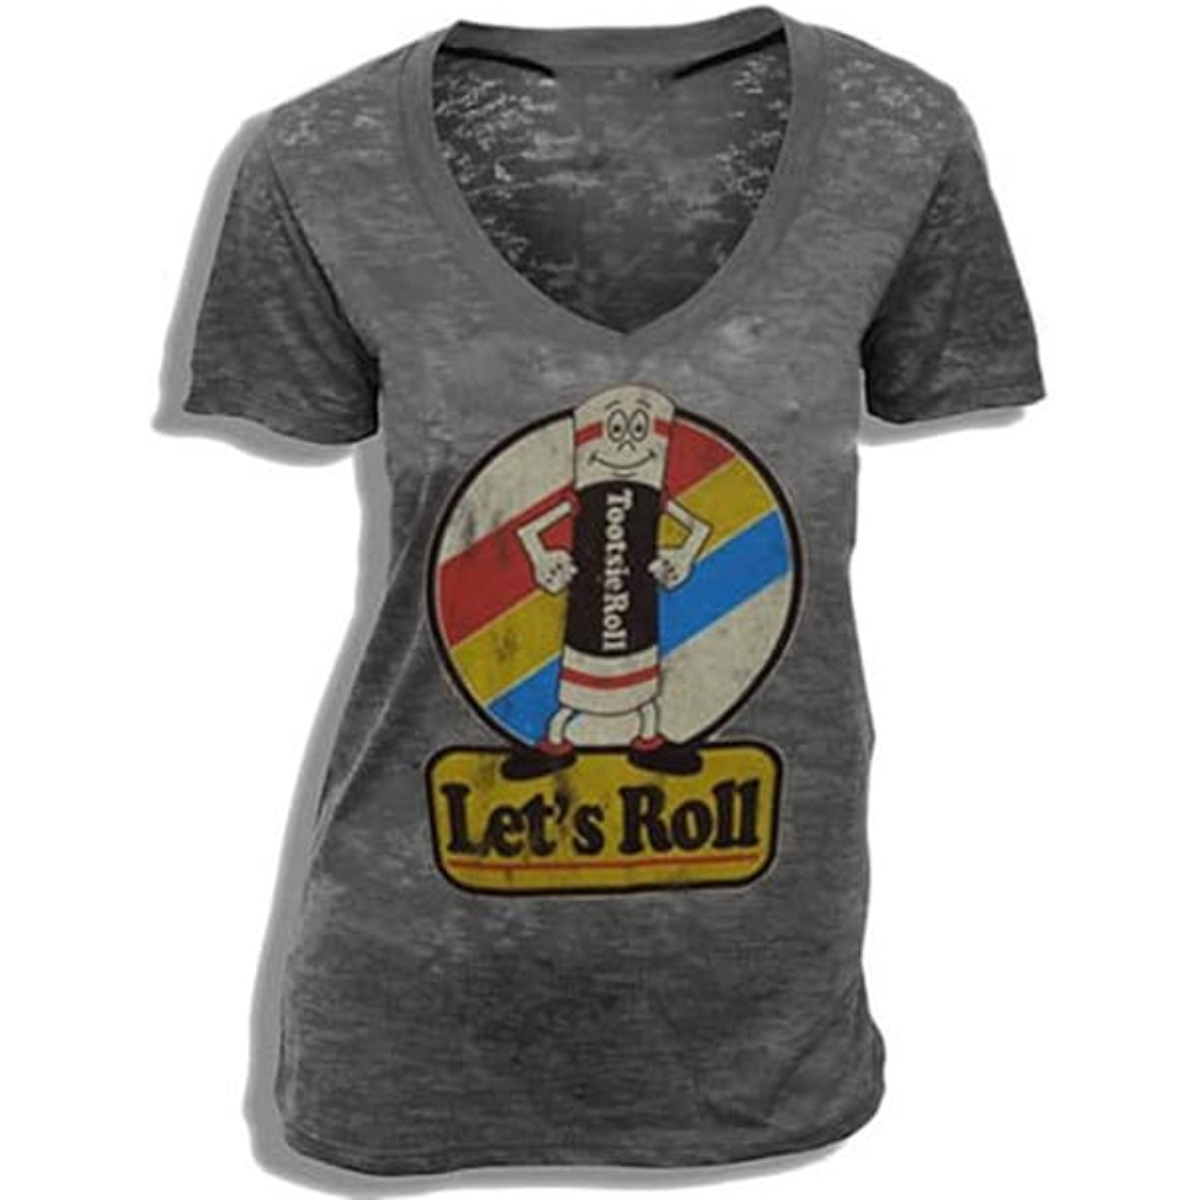 Tootsie Roll Let's Roll Black Adult t-shirt tee